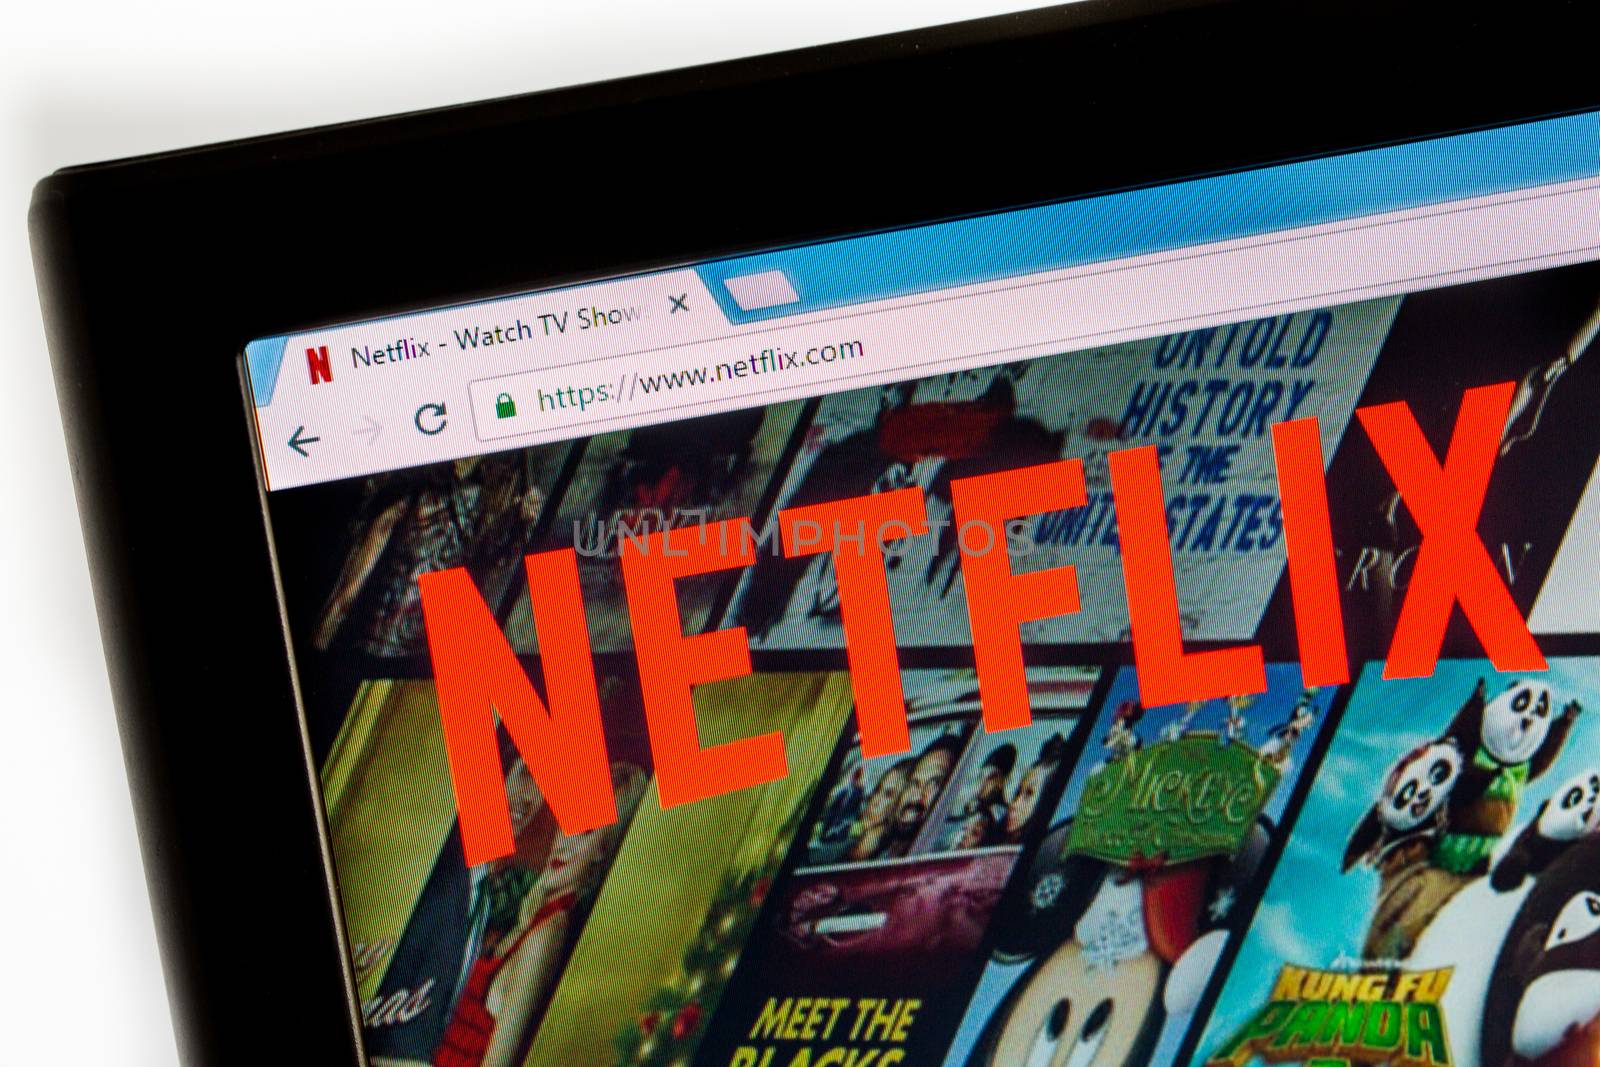 Paris, France - December 15, 2016: Netflix HomePage of Website. Netflix Inc. is an American multinational entertainment company founded on 1997. It specializes in and provides streaming media and video on demand online and DVD by mail.